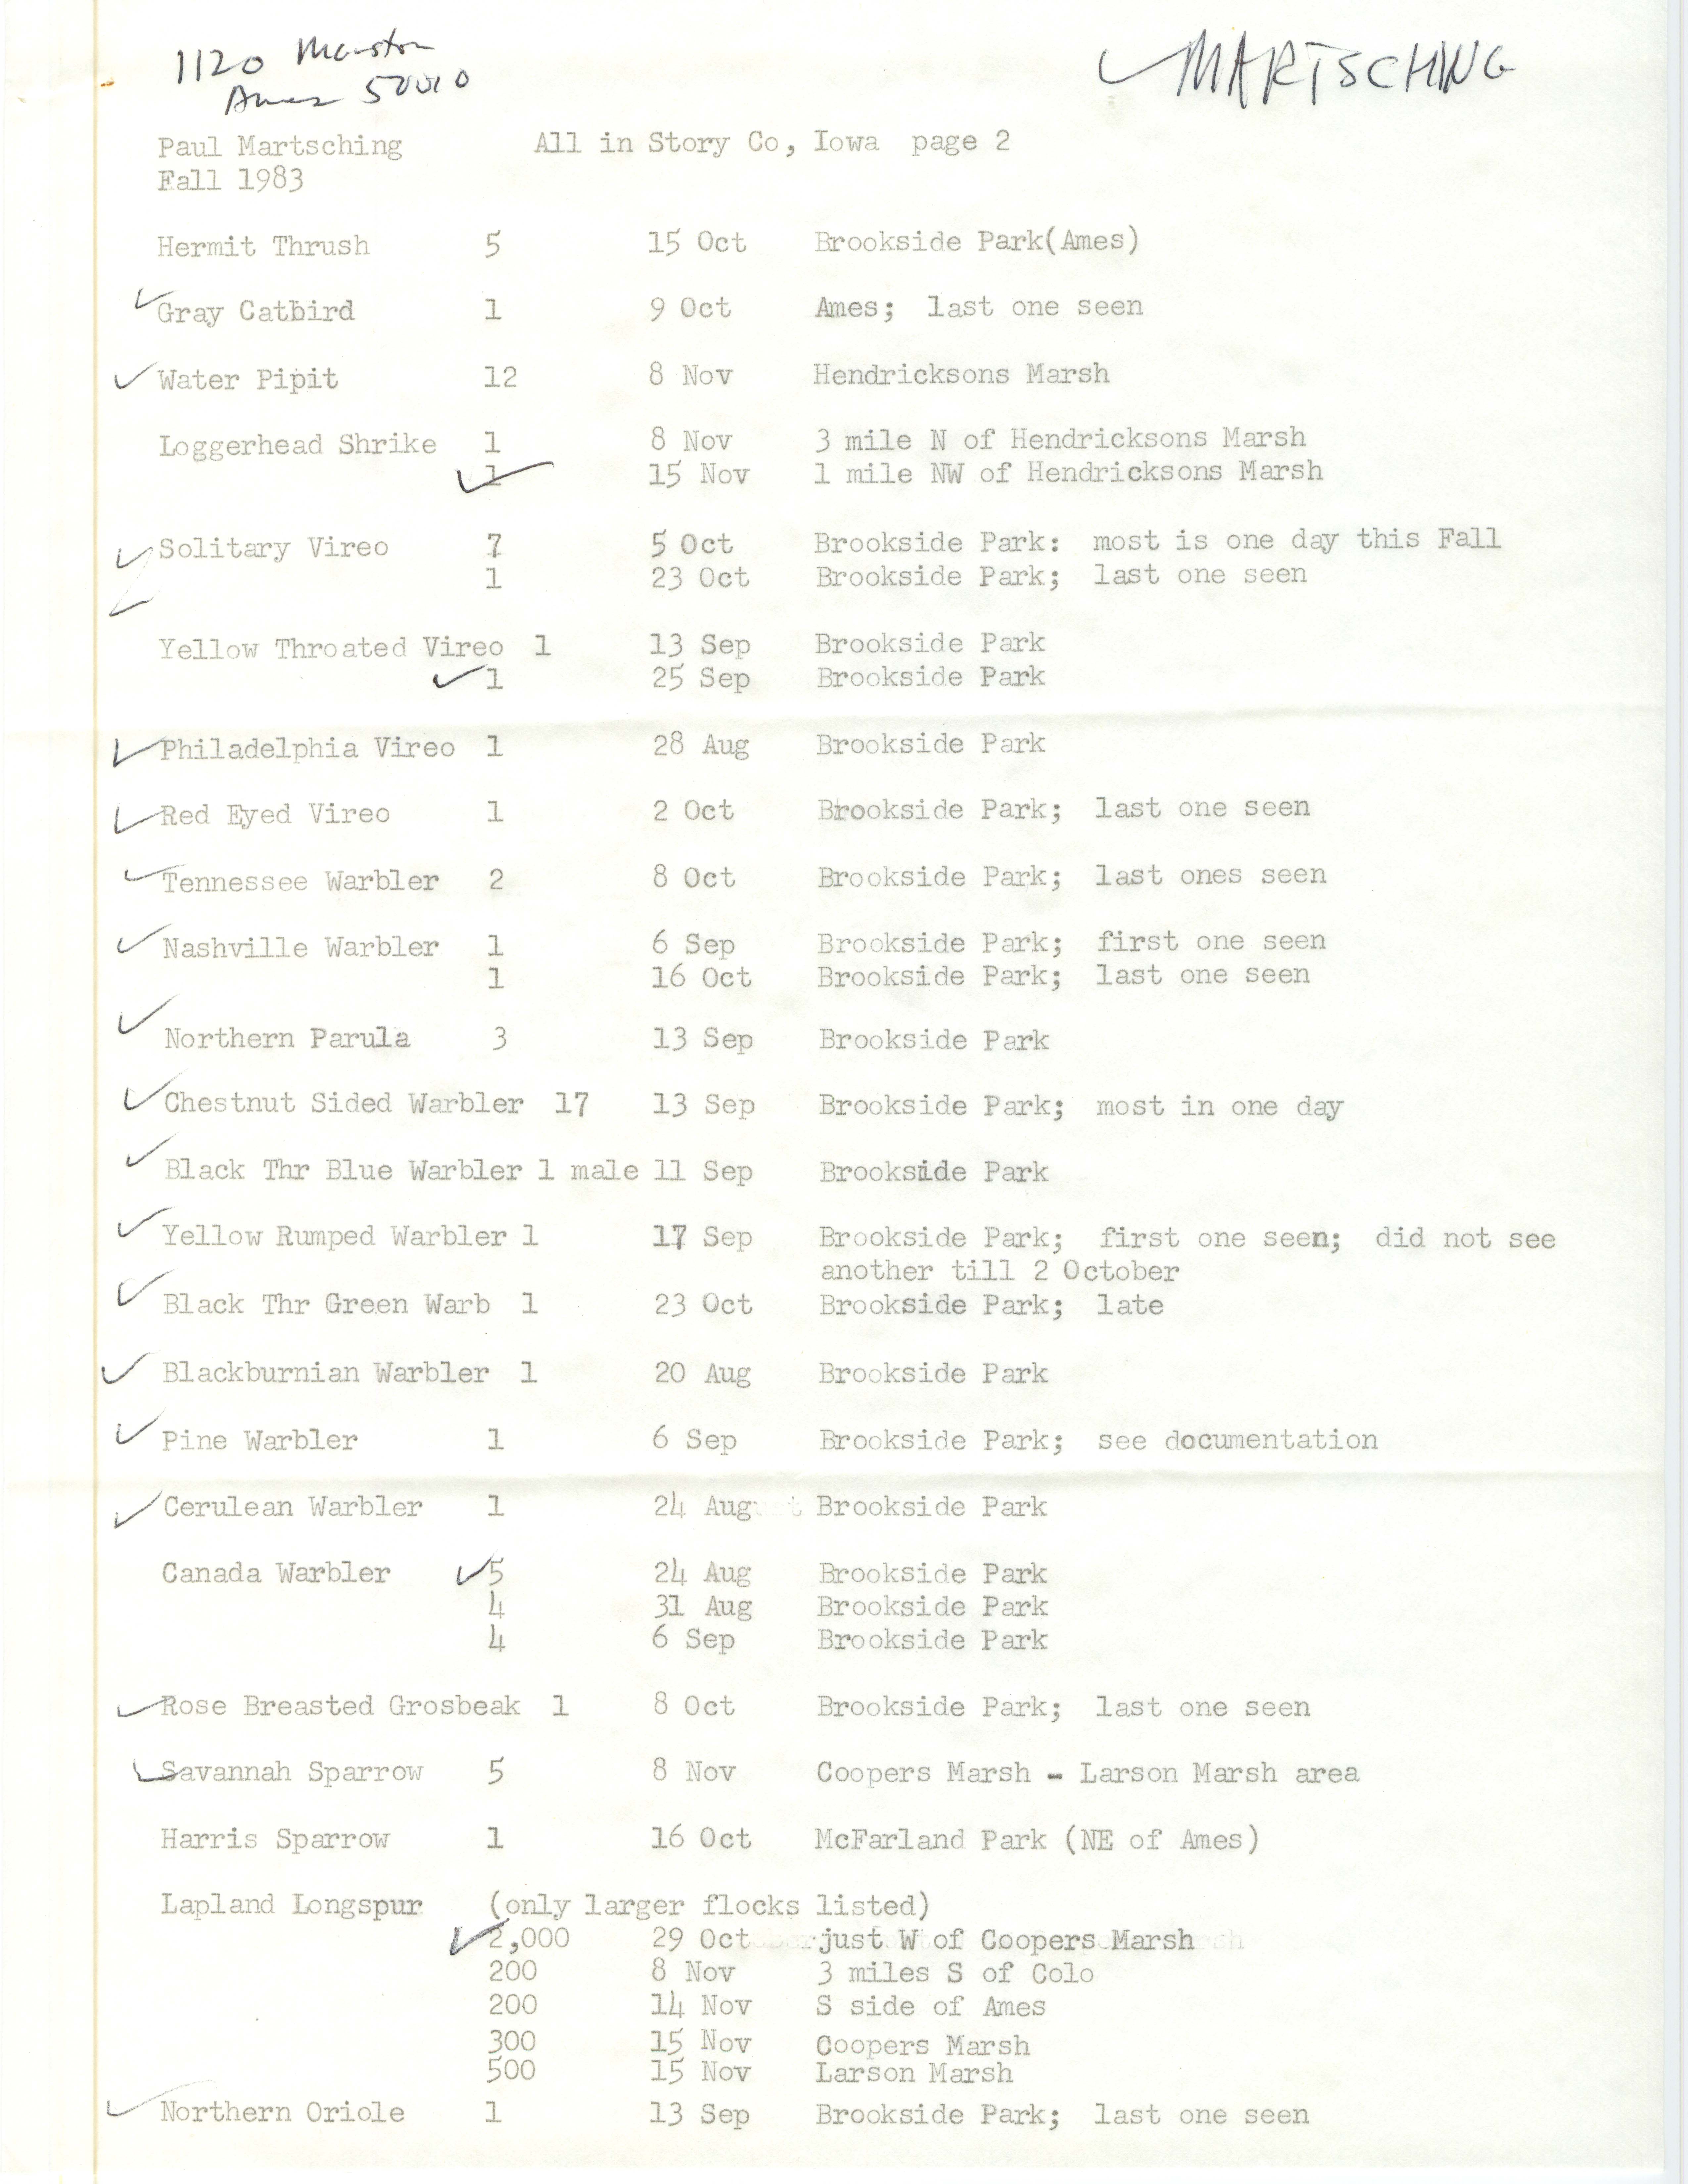 Annotated bird sighting list for fall 1983 compiled by Paul Martsching